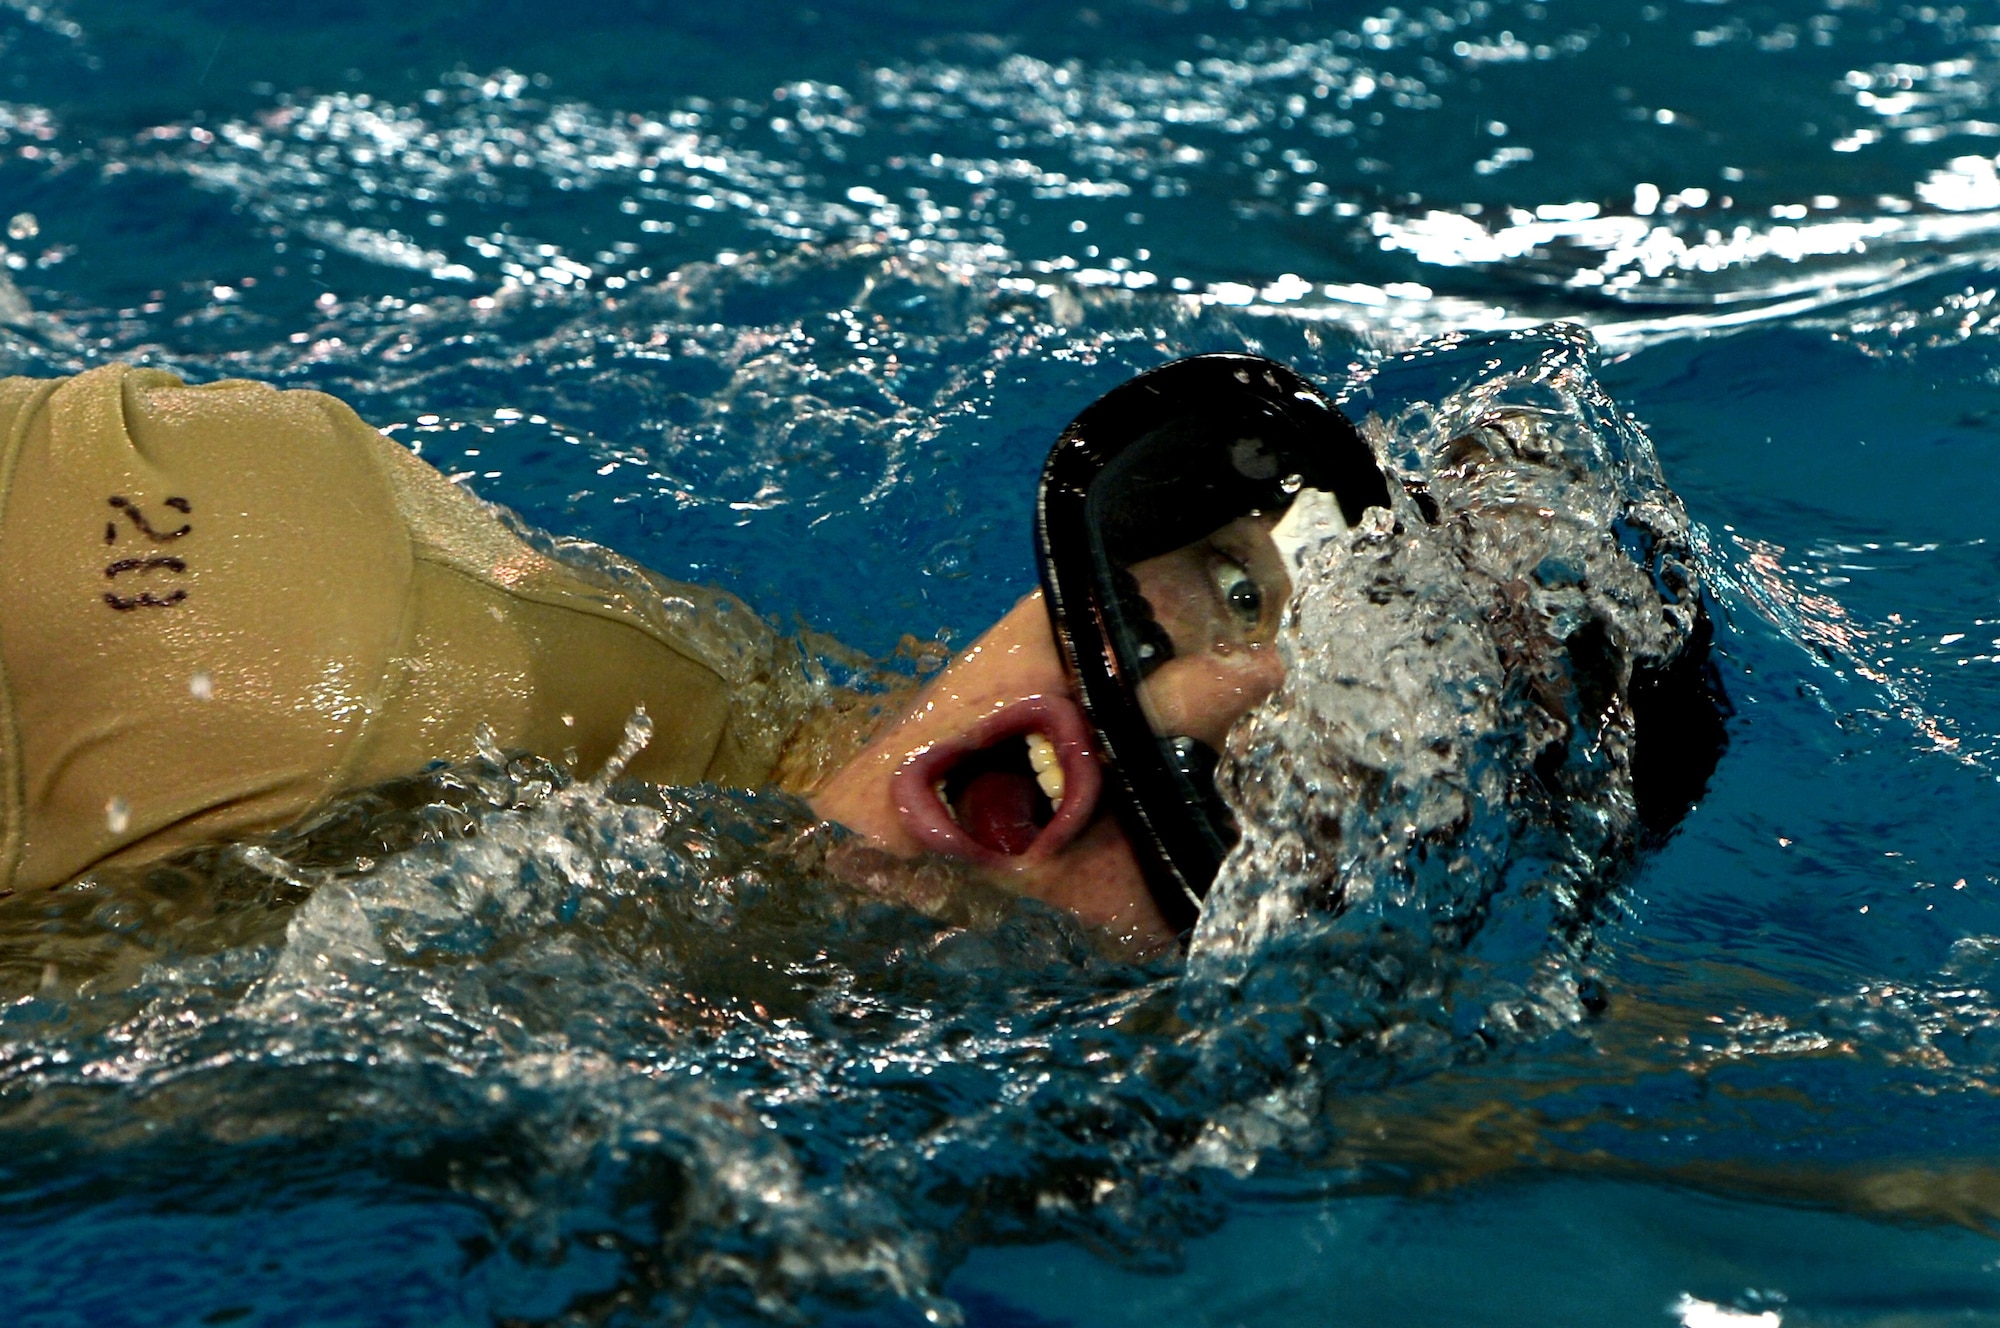 A U.S. Air Force Combat Control trainee assigned to Operating Location C, 342nd Training Squadron, takes a breath while swimming several laps during the warm-up phase of an early morning water circuit training session at Pope Army Airfield, North Carolina, Feb 12, 2015. The students are enduring a 13 week course which will equip them with the final skills needed to be CCT or Special Operations Weather Team qualified. (U.S. Air Force photo by Staff Sgt. Kenny Holston)